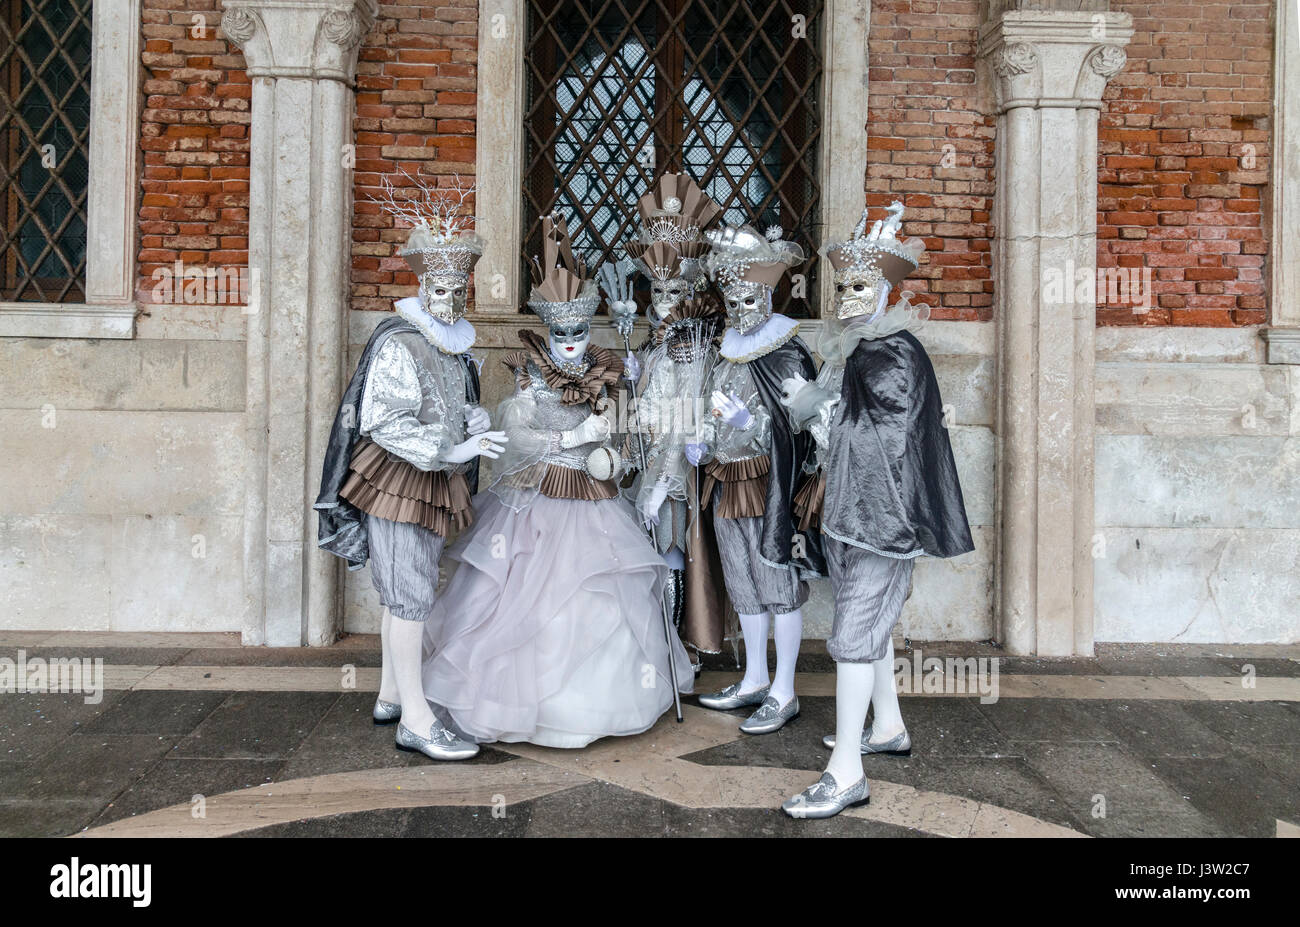 Image of five individuals in complementary ornate costumes along the Palace of the Doges during the Carnevale festival in Venice, Italy. Stock Photo